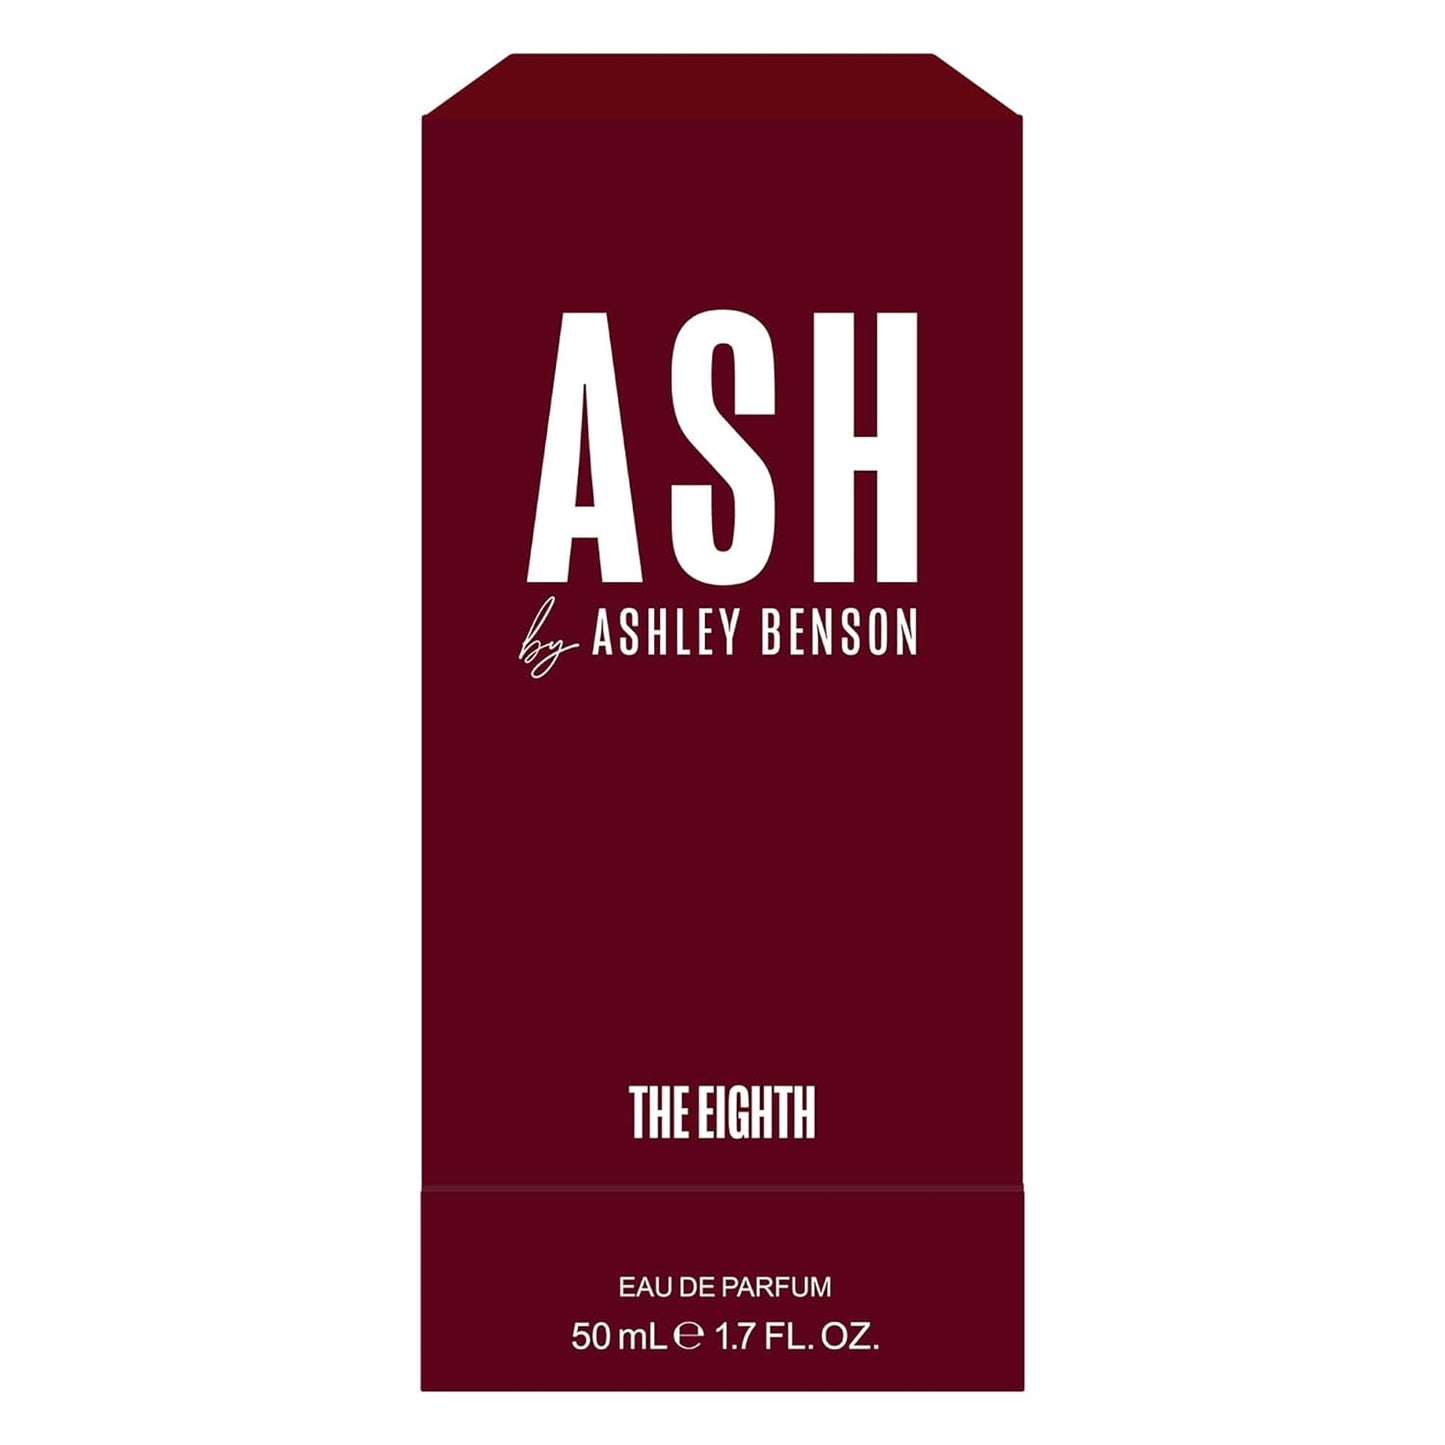 Ash by Ashley Benson The Eighth Perfume for Men and Women - Sensual, Romantic Fragrance - Appealing Scent of Paris - With Citrus Bergamot, Soft Musk, and Cashmere Woods - 1.7 oz EDP Spray